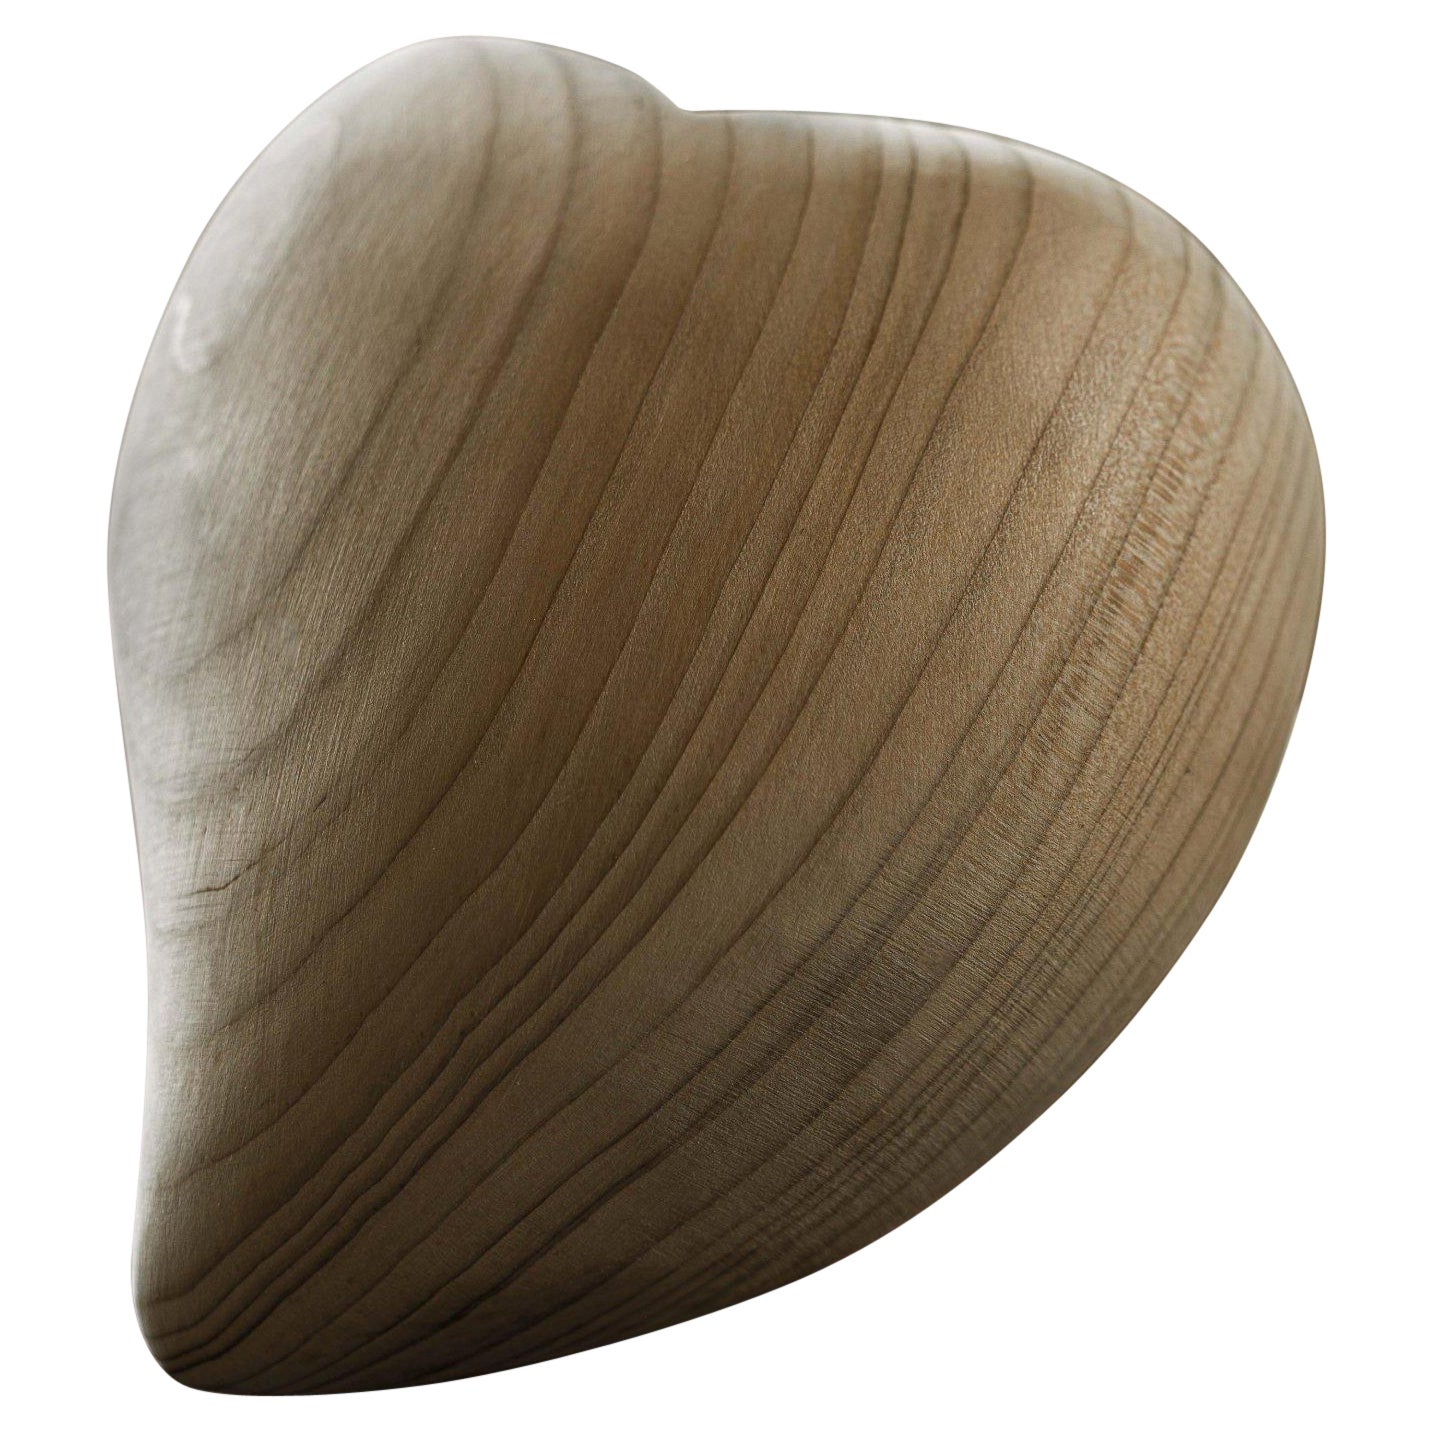 In Stock in Los Angeles, Cuore Heart Cedar Wood Paperweight Small, Made in Italy